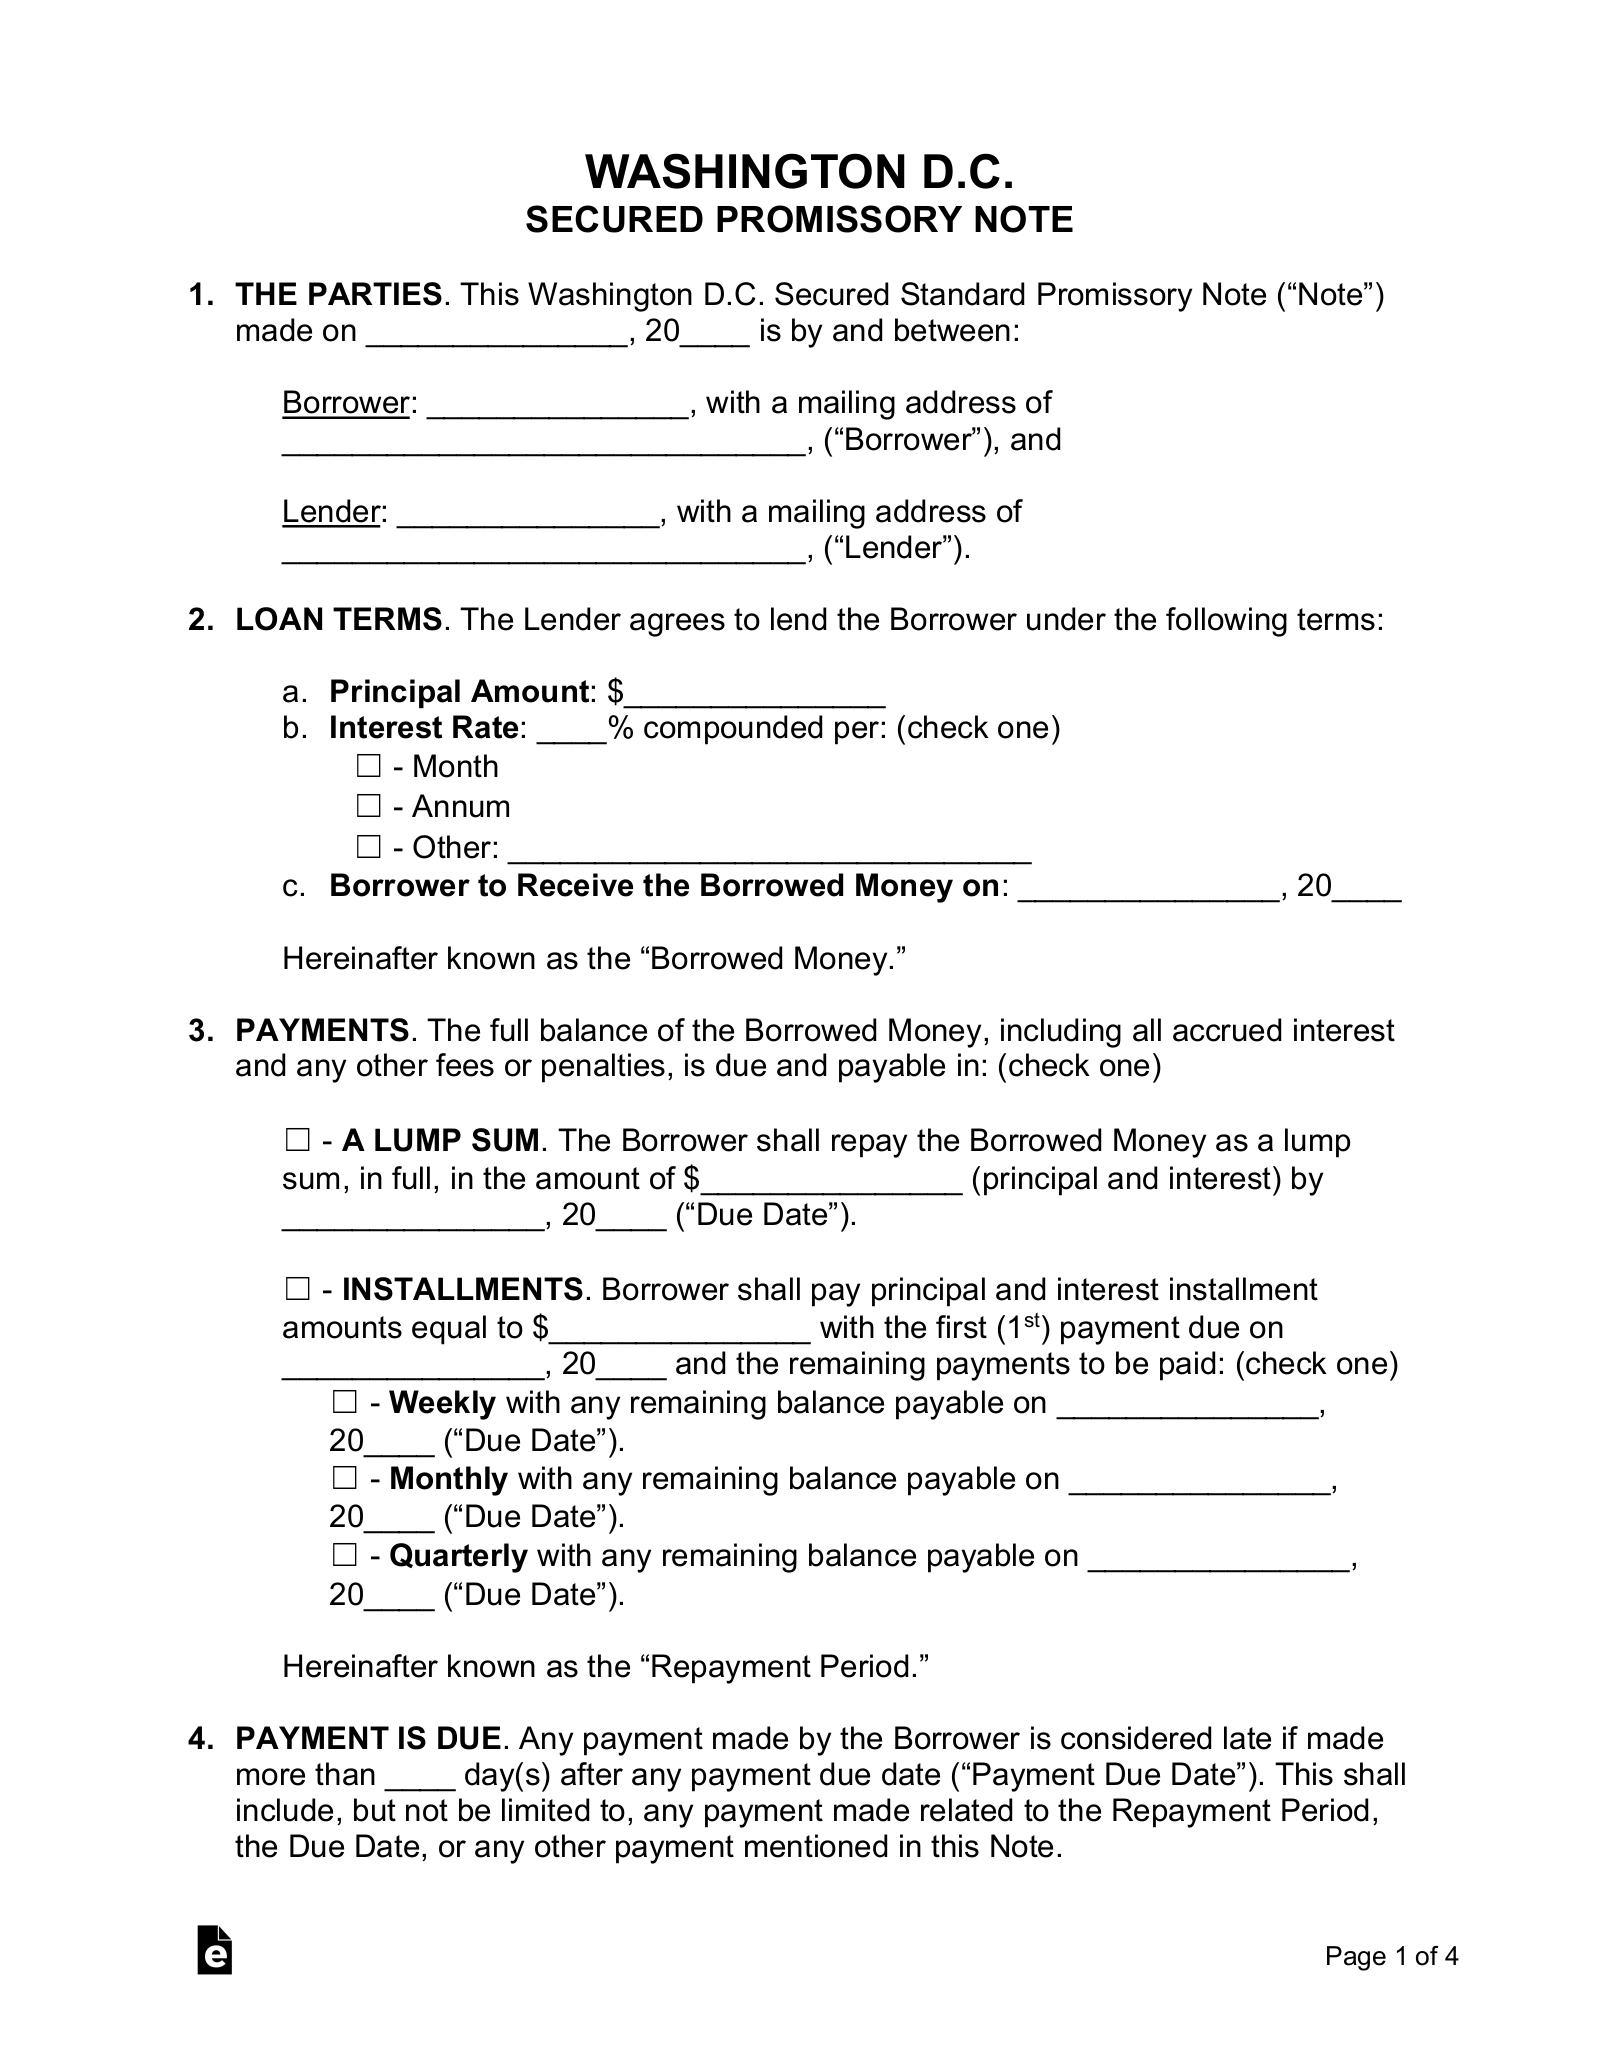 Washington D.C. Secured Promissory Note Template